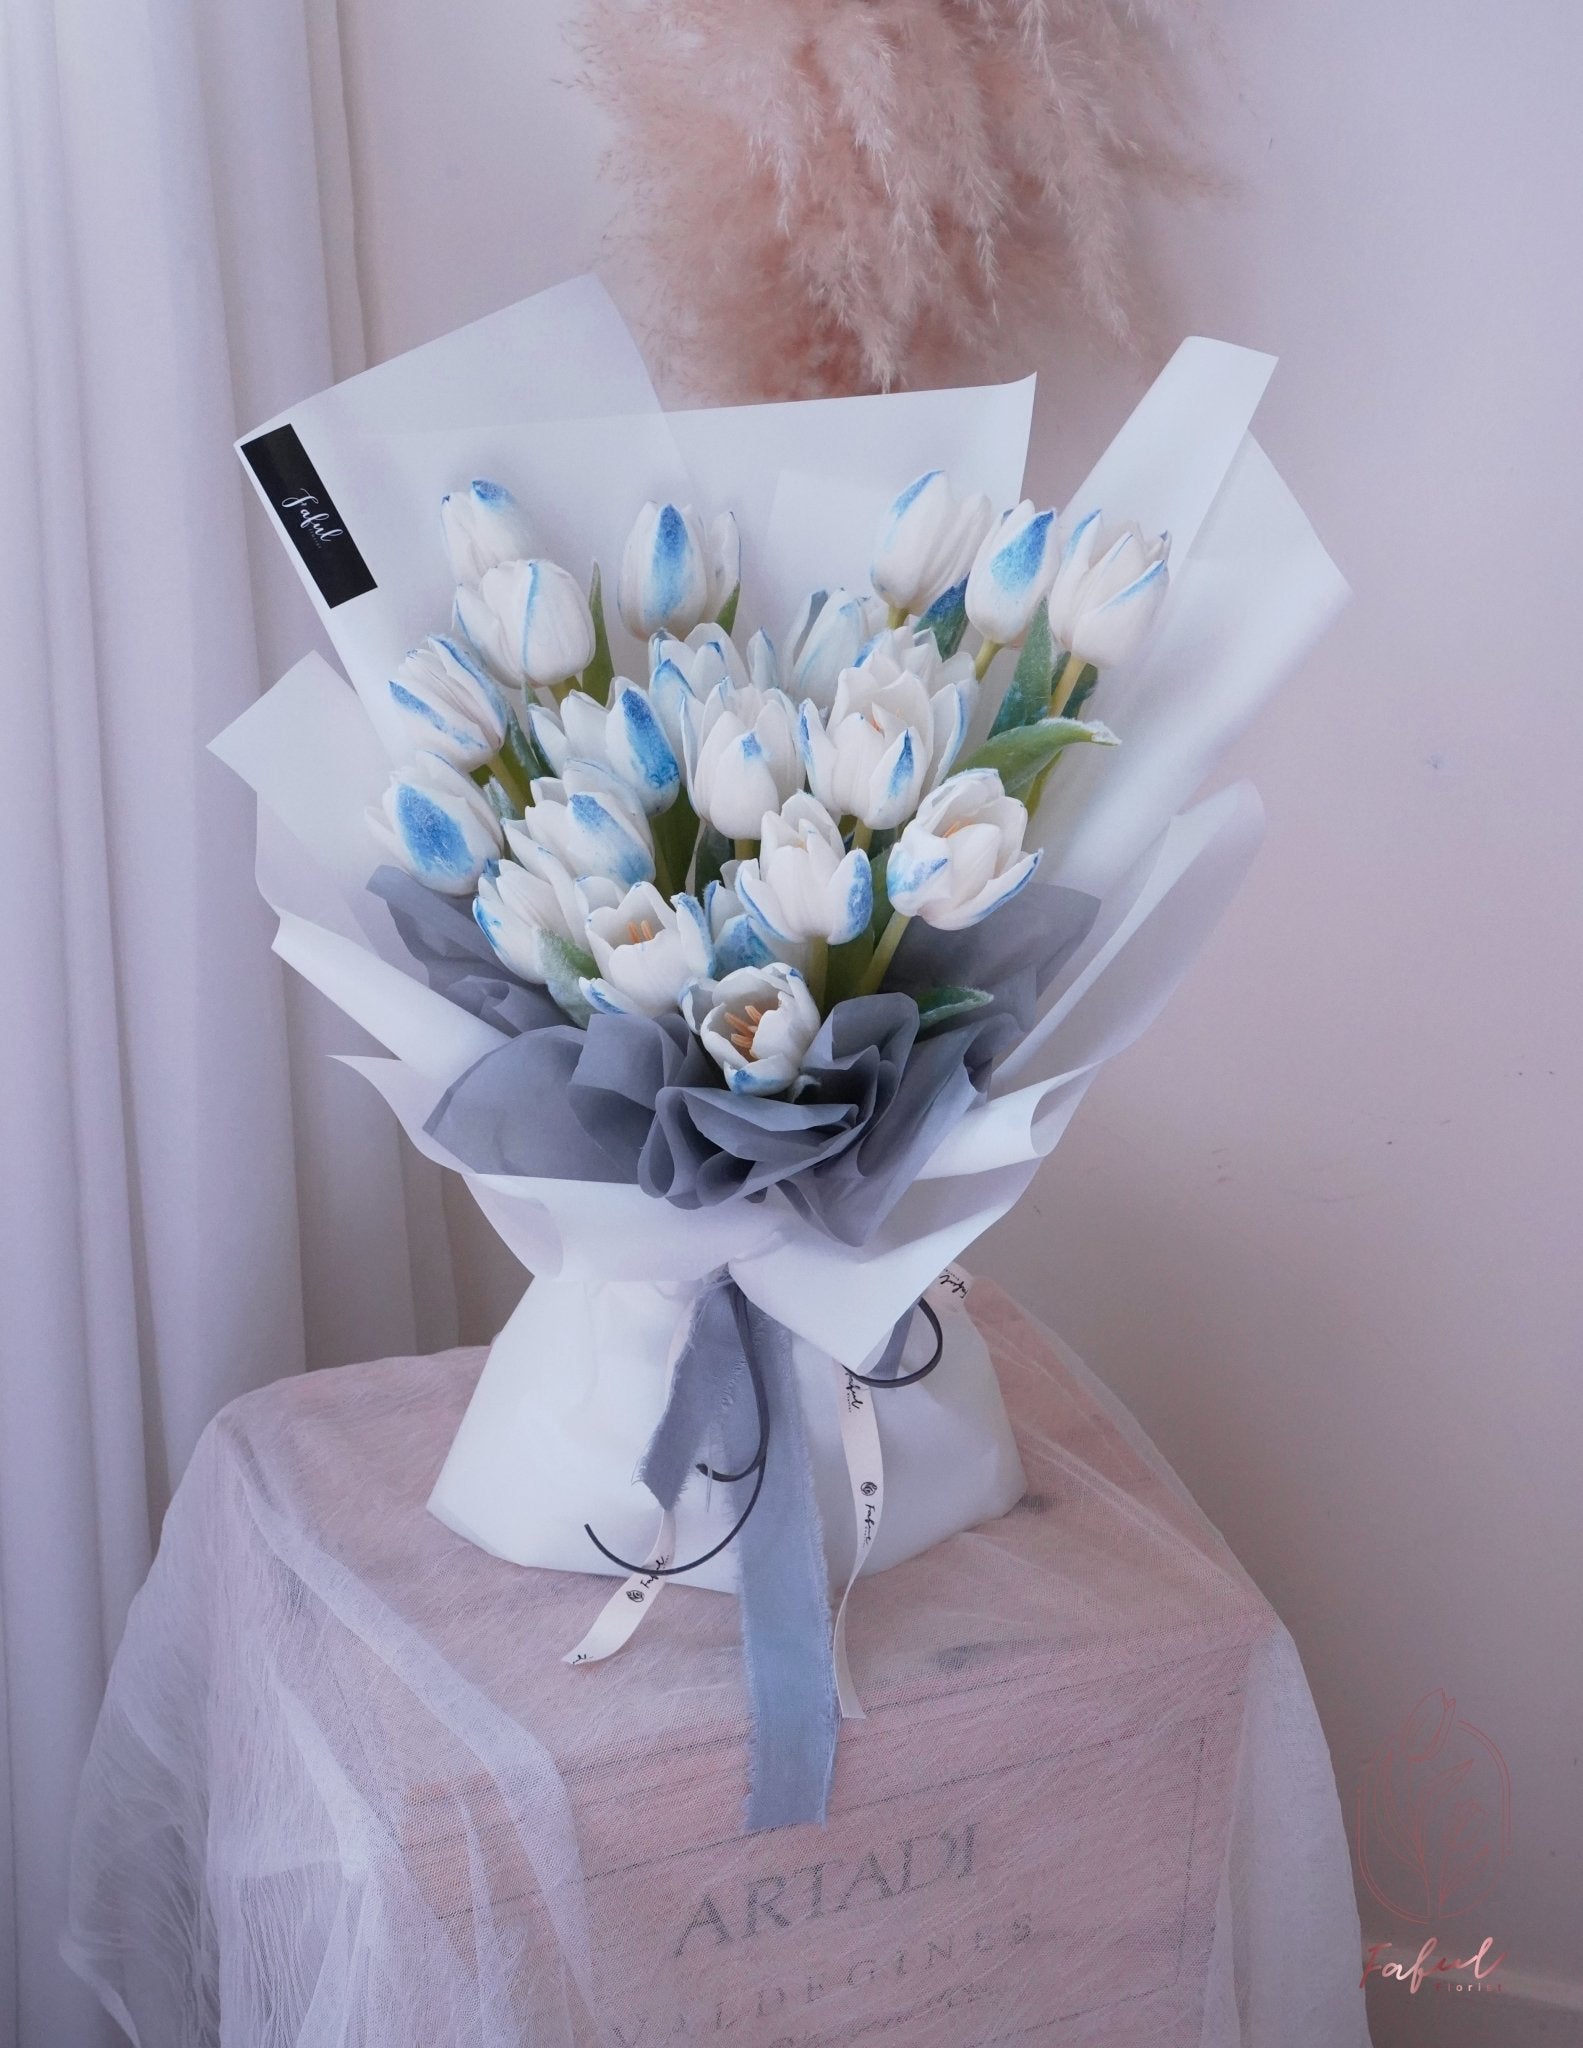 "Snowflake Flowers" - A delicate arrangement featuring frozen tulips reminiscent of snowflakes, perfect flowers for flower delivery in Hong Kong.4